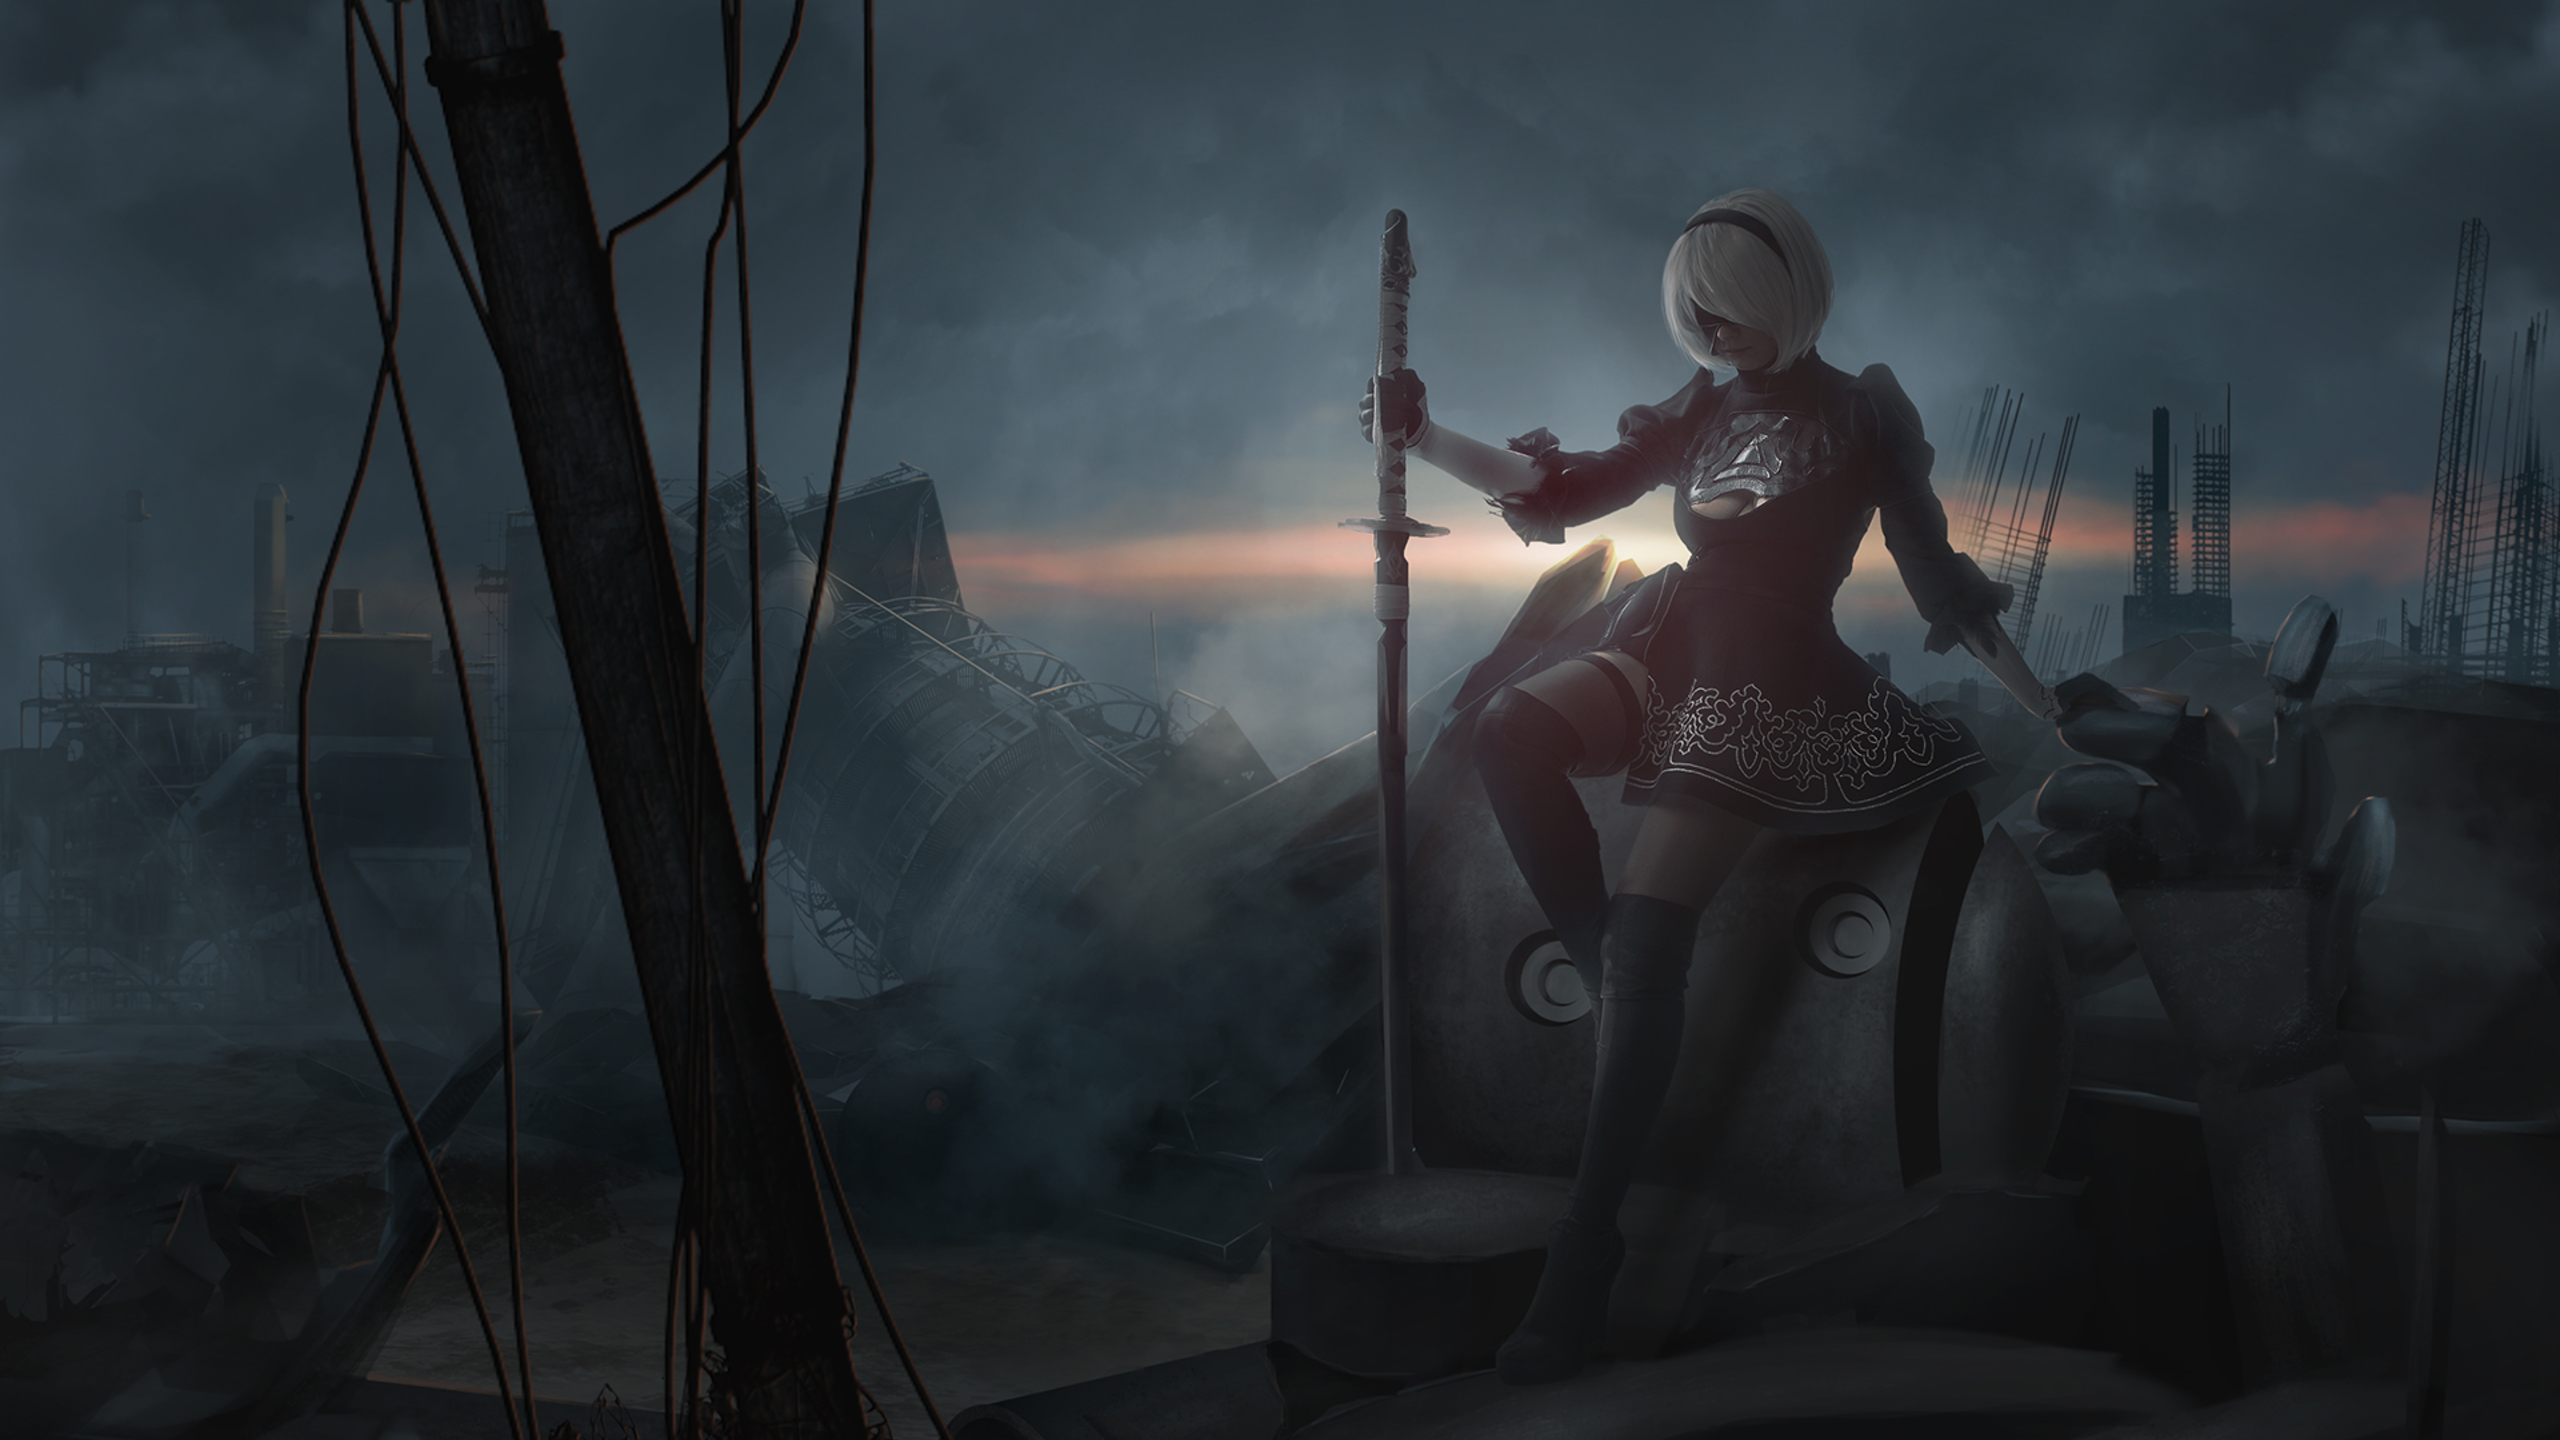 Free Download Automata Hd Wallpaper Hd Nier Automata Hd Wallpapers 2560x1440 For Your Desktop Mobile Tablet Explore 51 Nier Automata Wallpapers Nier Automata Wallpapers Nier Wallpaper Nier Replicant Wallpaper